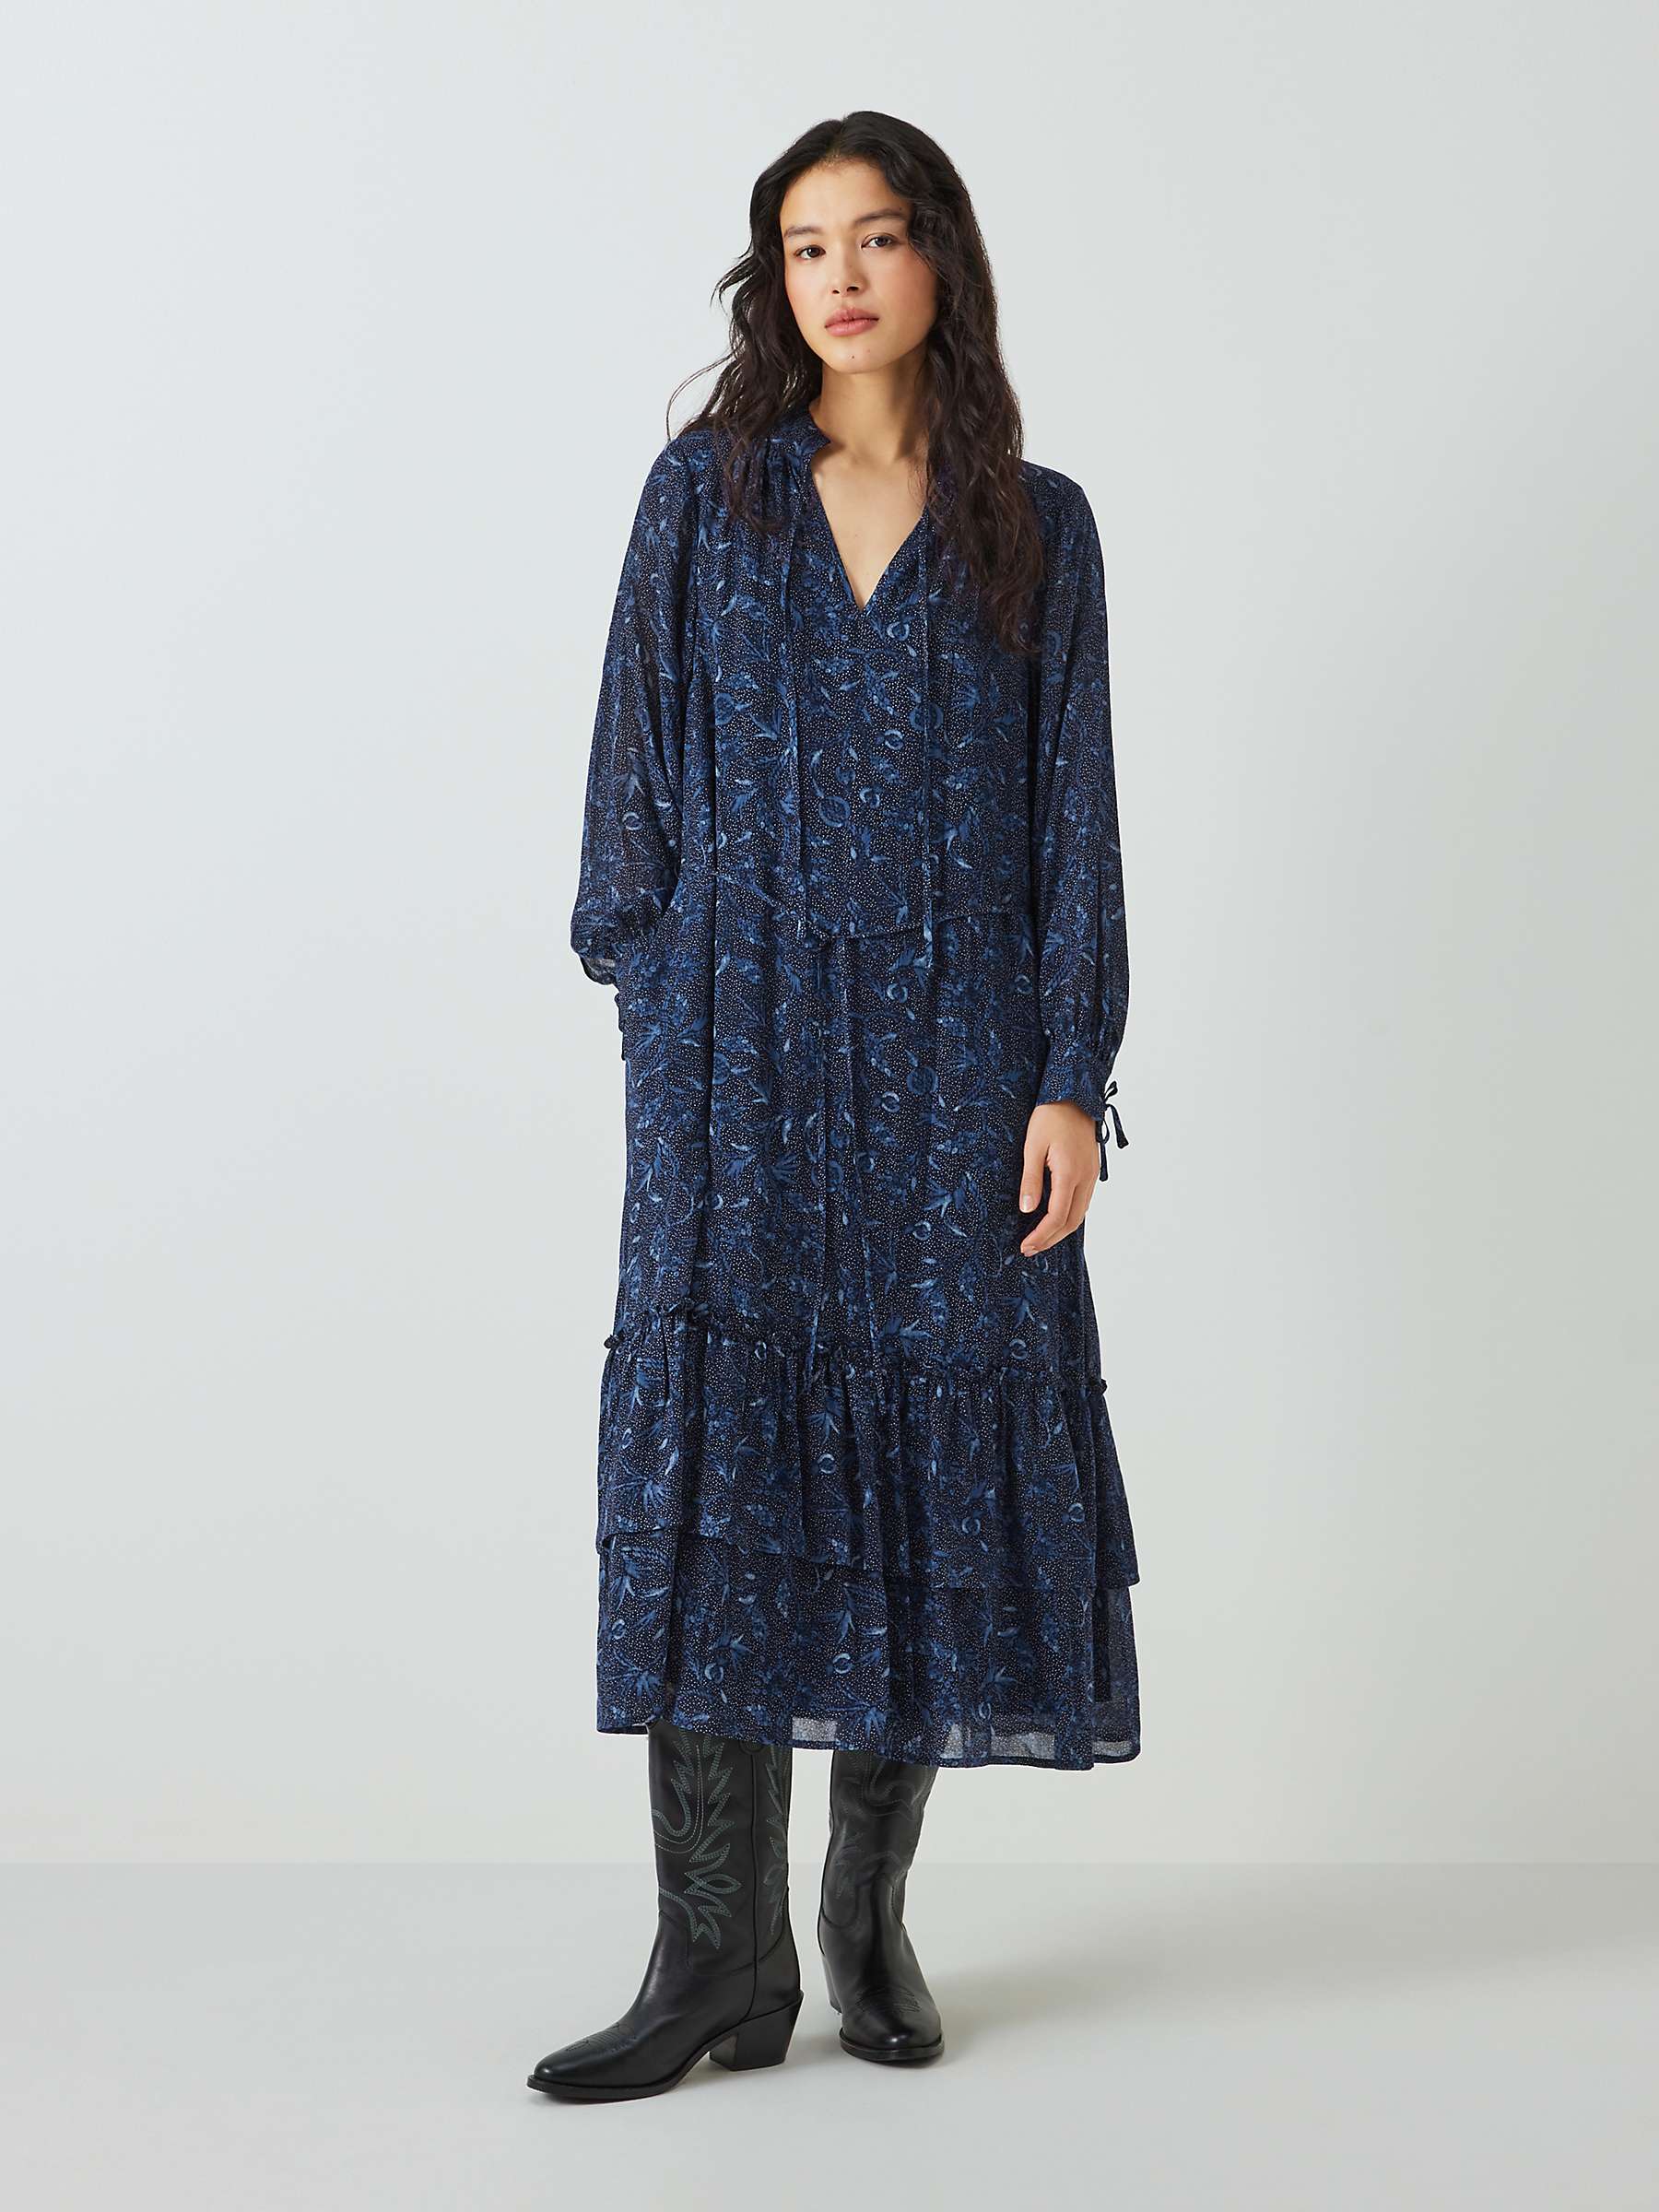 Buy AND/OR Joanie Chiffon Floral Midi Dress, Blue Online at johnlewis.com